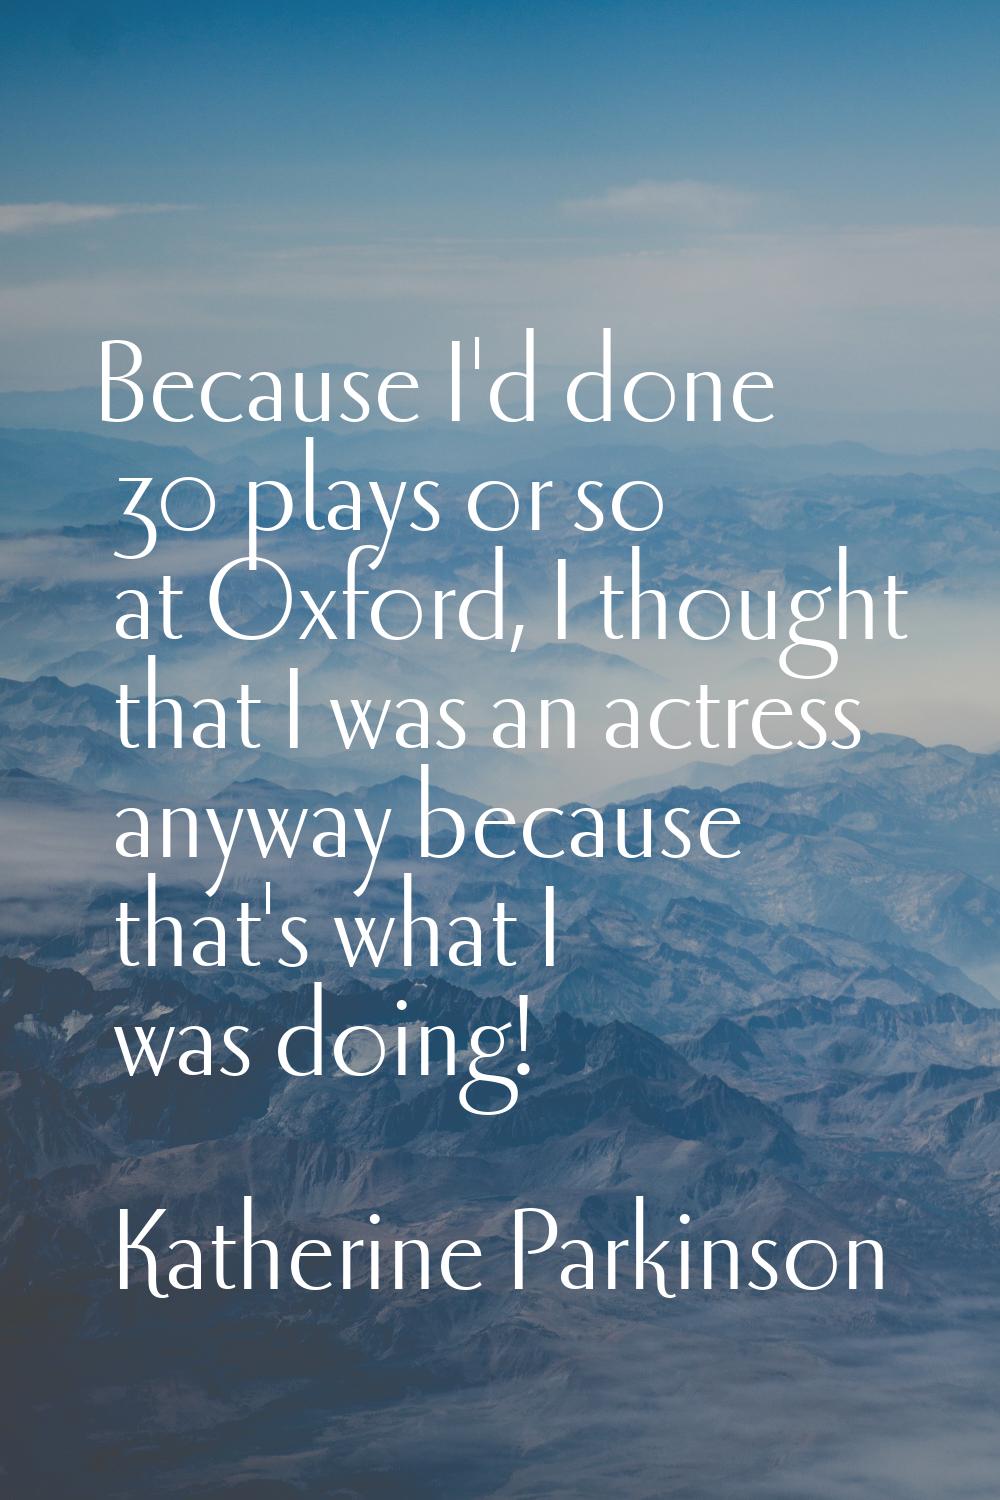 Because I'd done 30 plays or so at Oxford, I thought that I was an actress anyway because that's wh